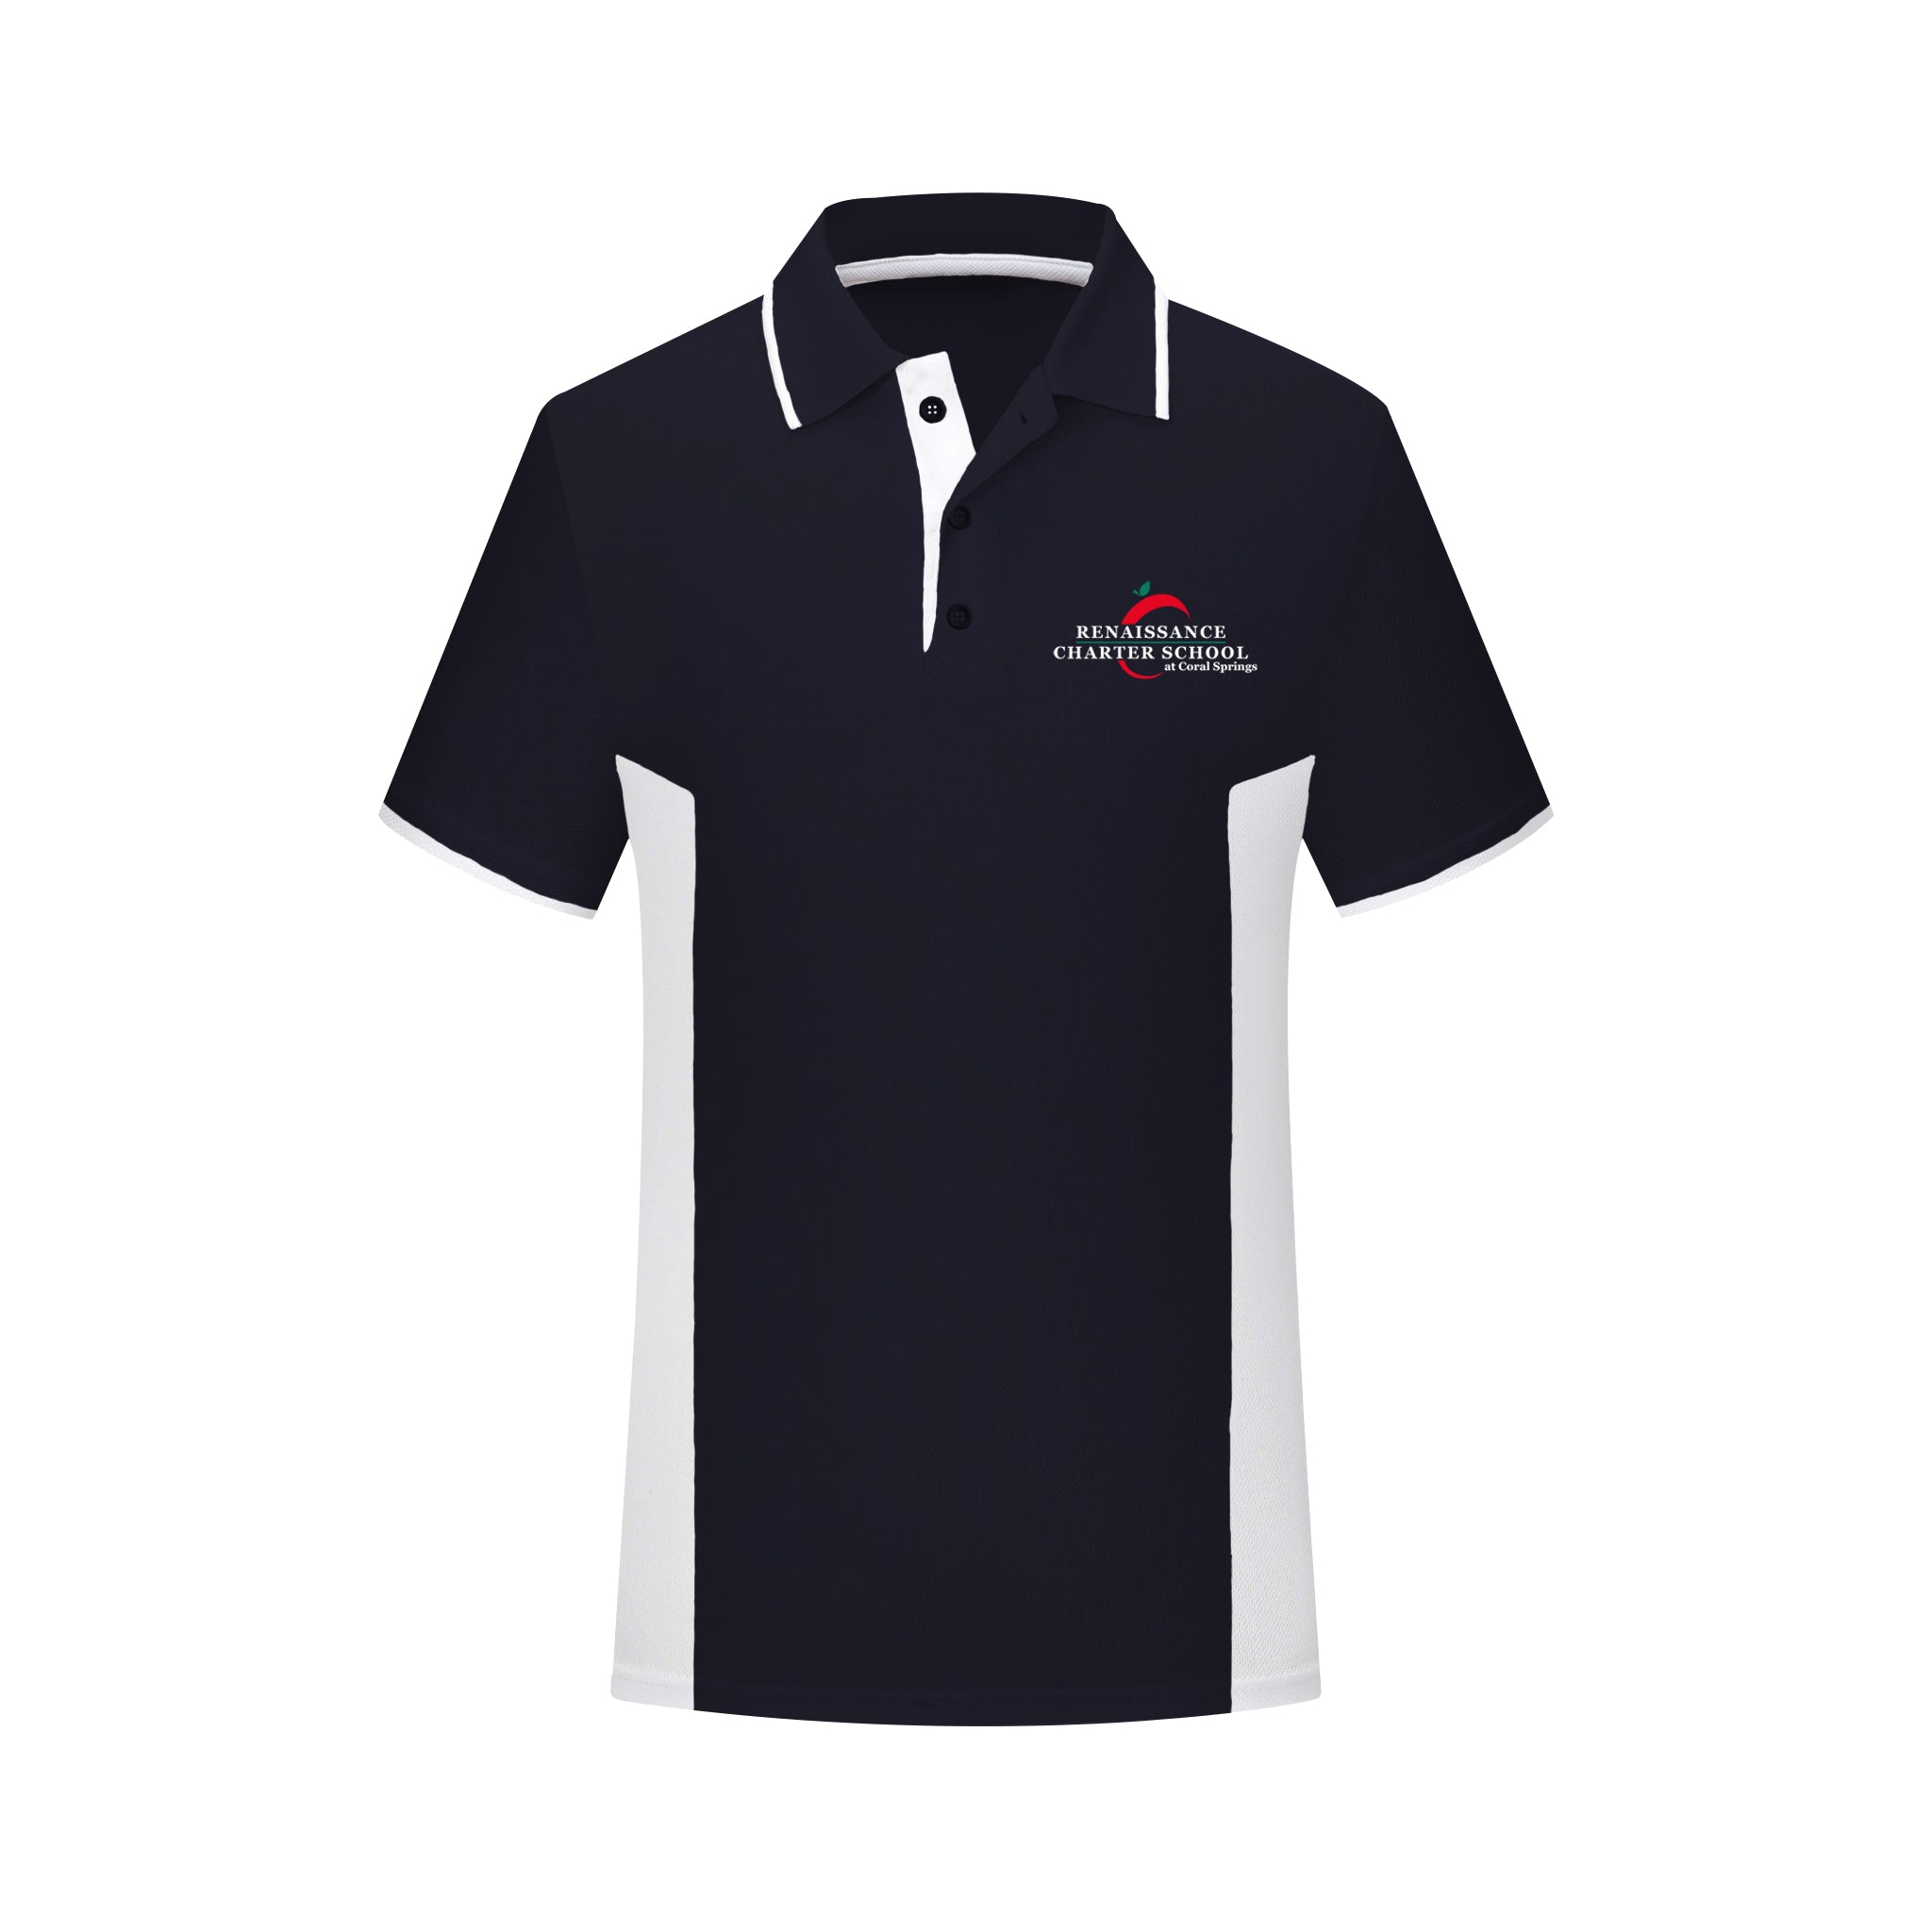 Renaissance Charter School At Coral Springs (6-8) - Freedom Activewear Polo